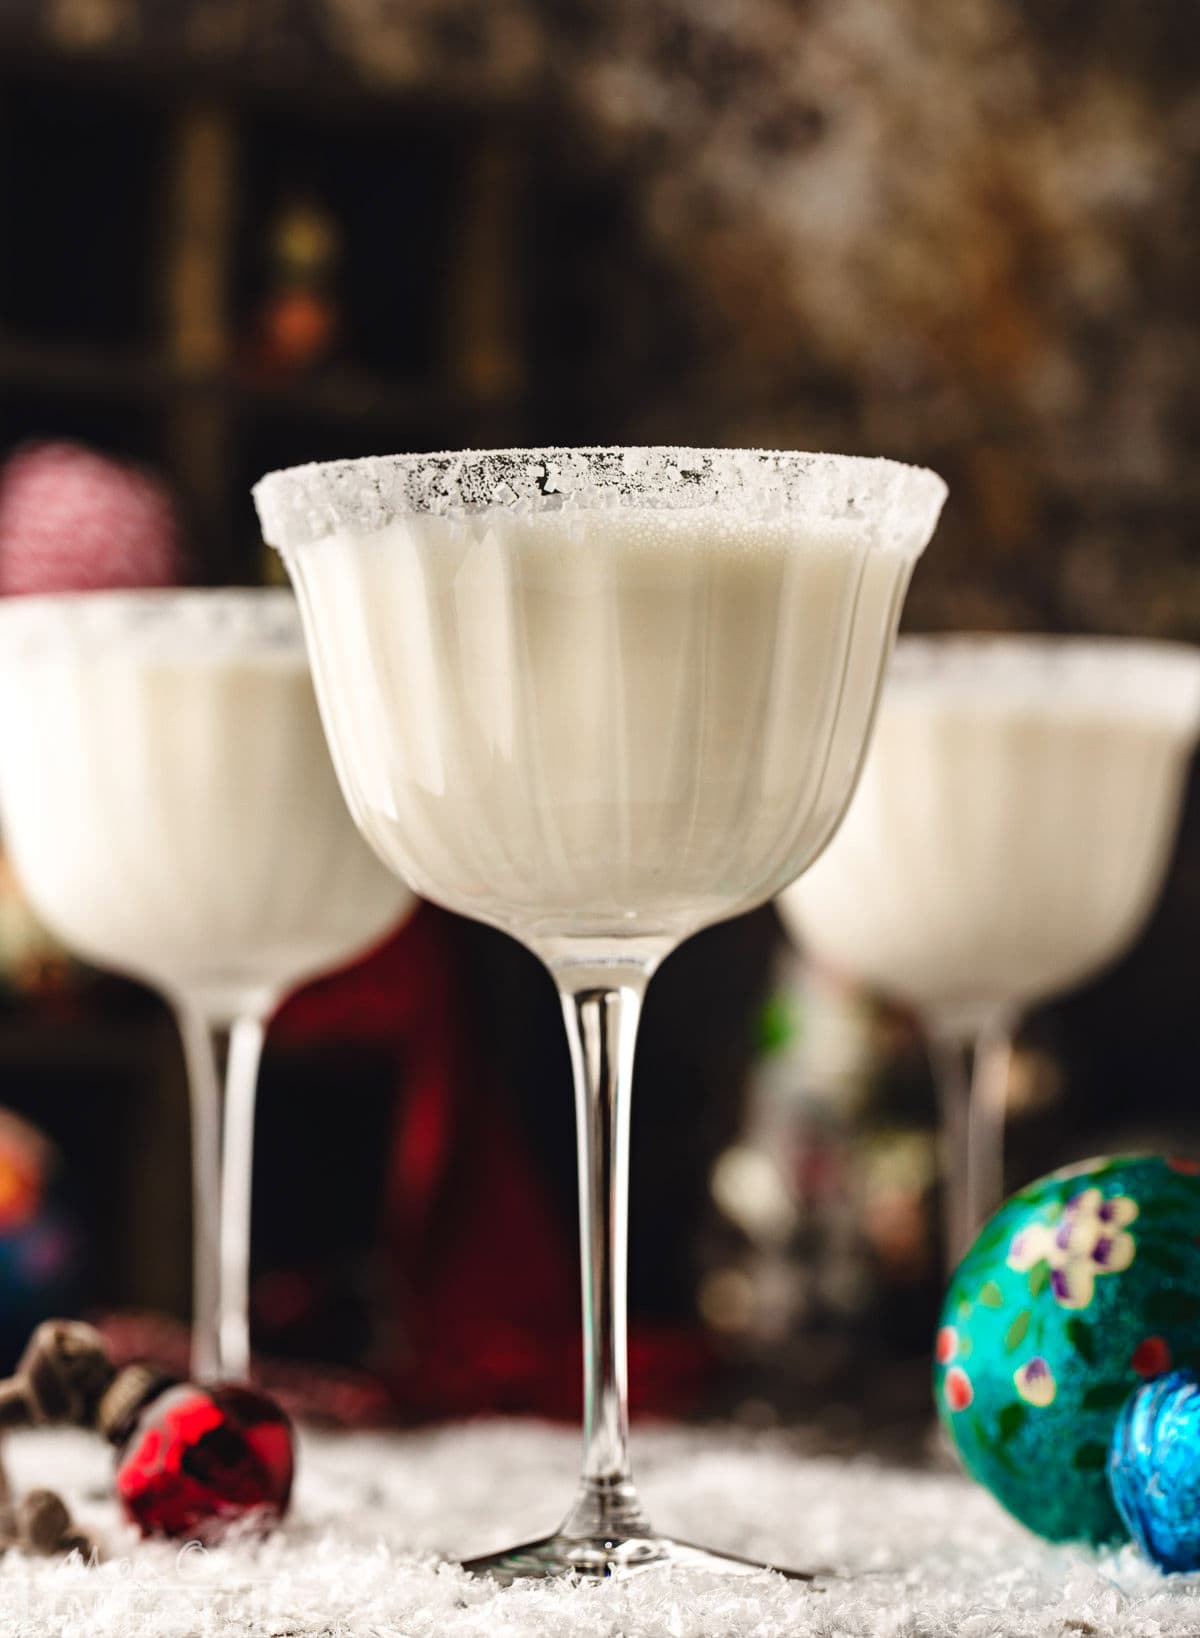 three white chocolate martinis in tall glasses dusted with powdered sugar for a snowy look. the cocktails are sitting on a snowy surface with glass ornaments scattered about.